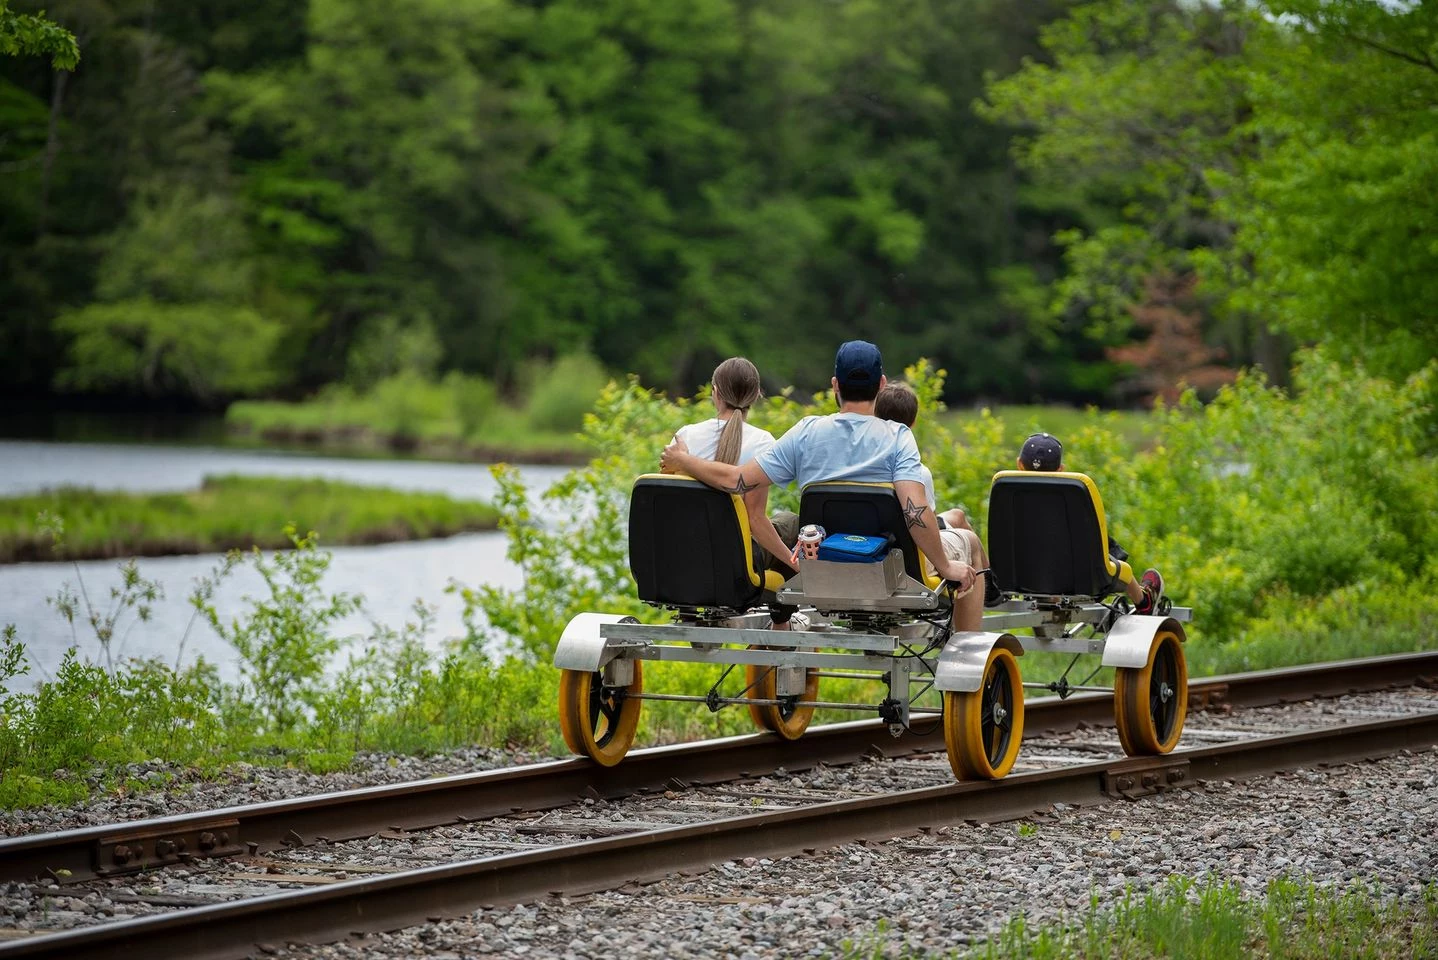 Adirondack Rail Trail provides opportunities to park and ride